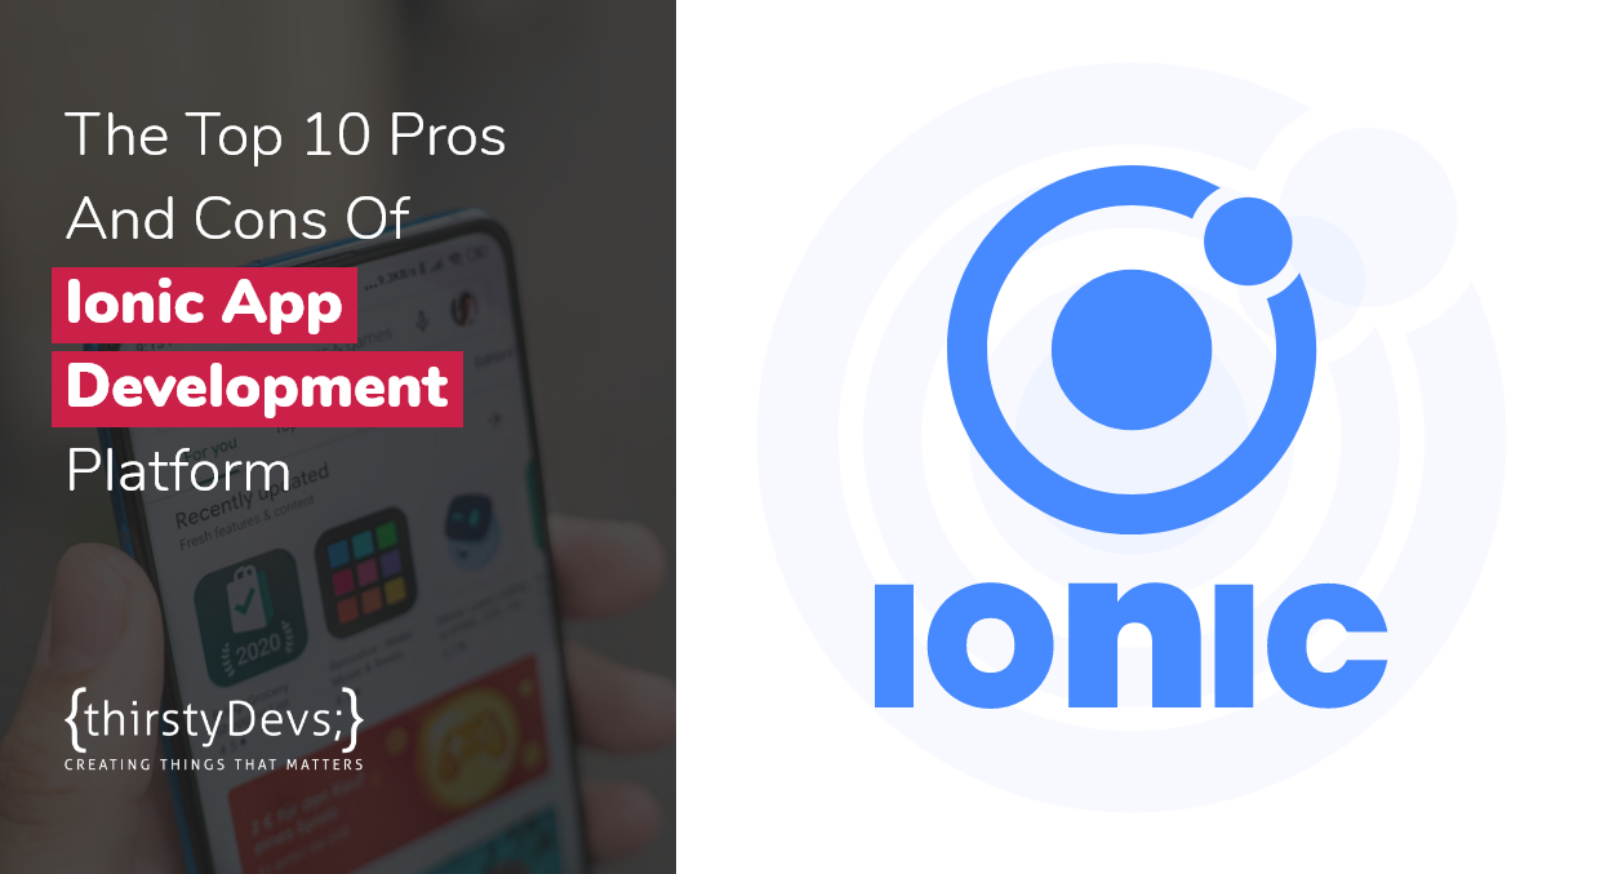 Top 10 Pros And Cons Of Ionic App Development Framework thirstyDevs